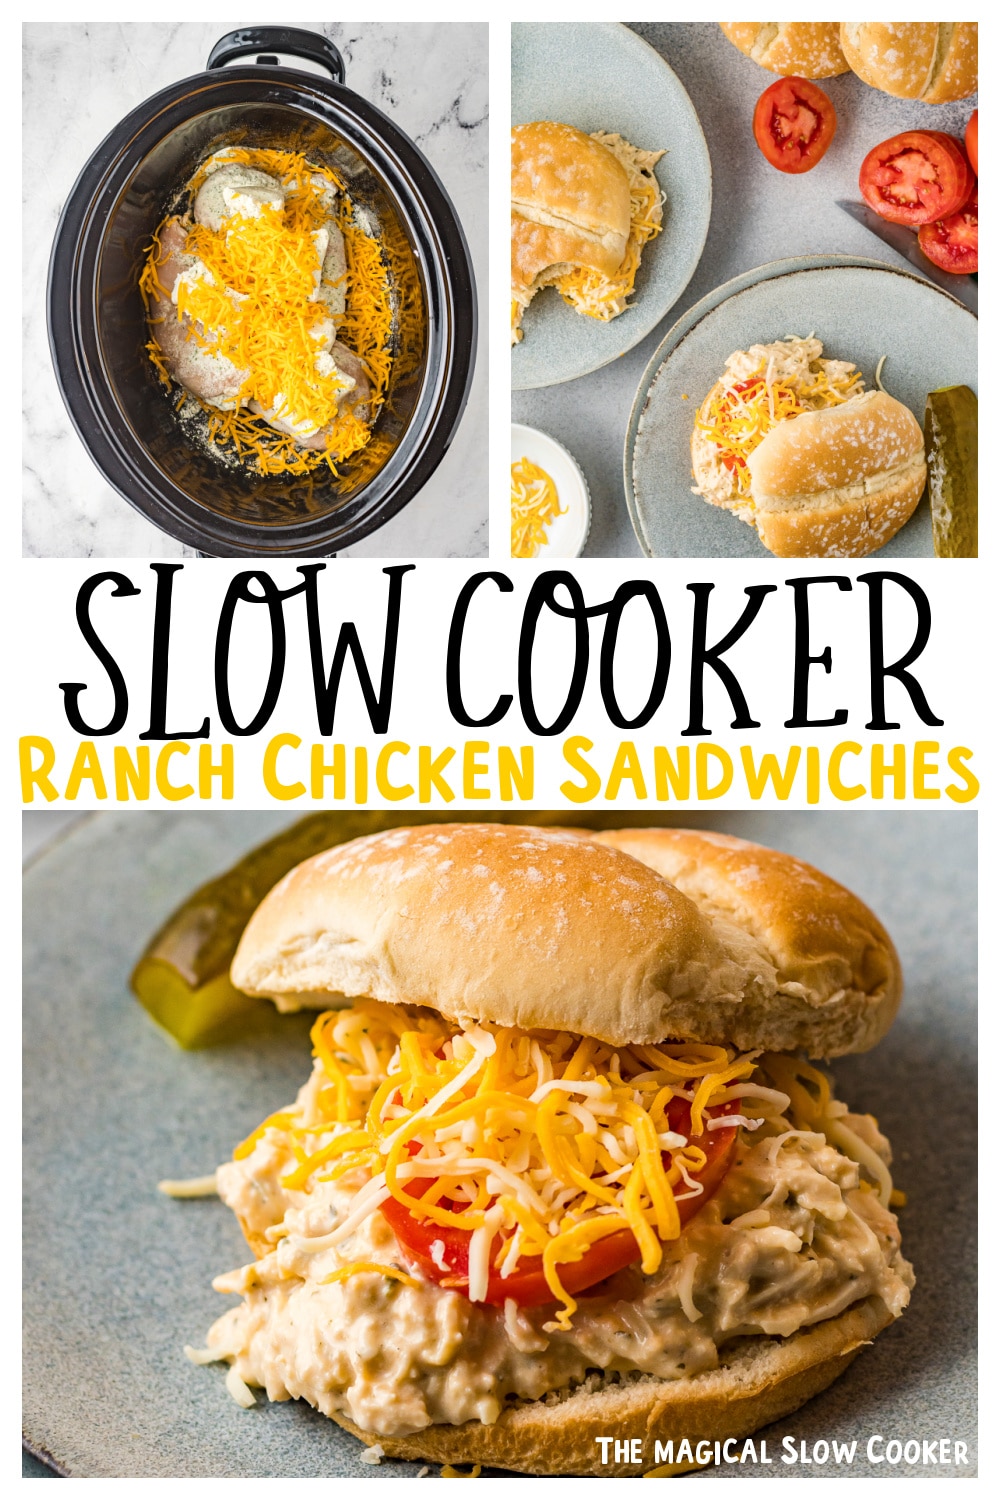 Slow Cooker Ranch Chicken Sandwiches - The Magical Slow Cooker